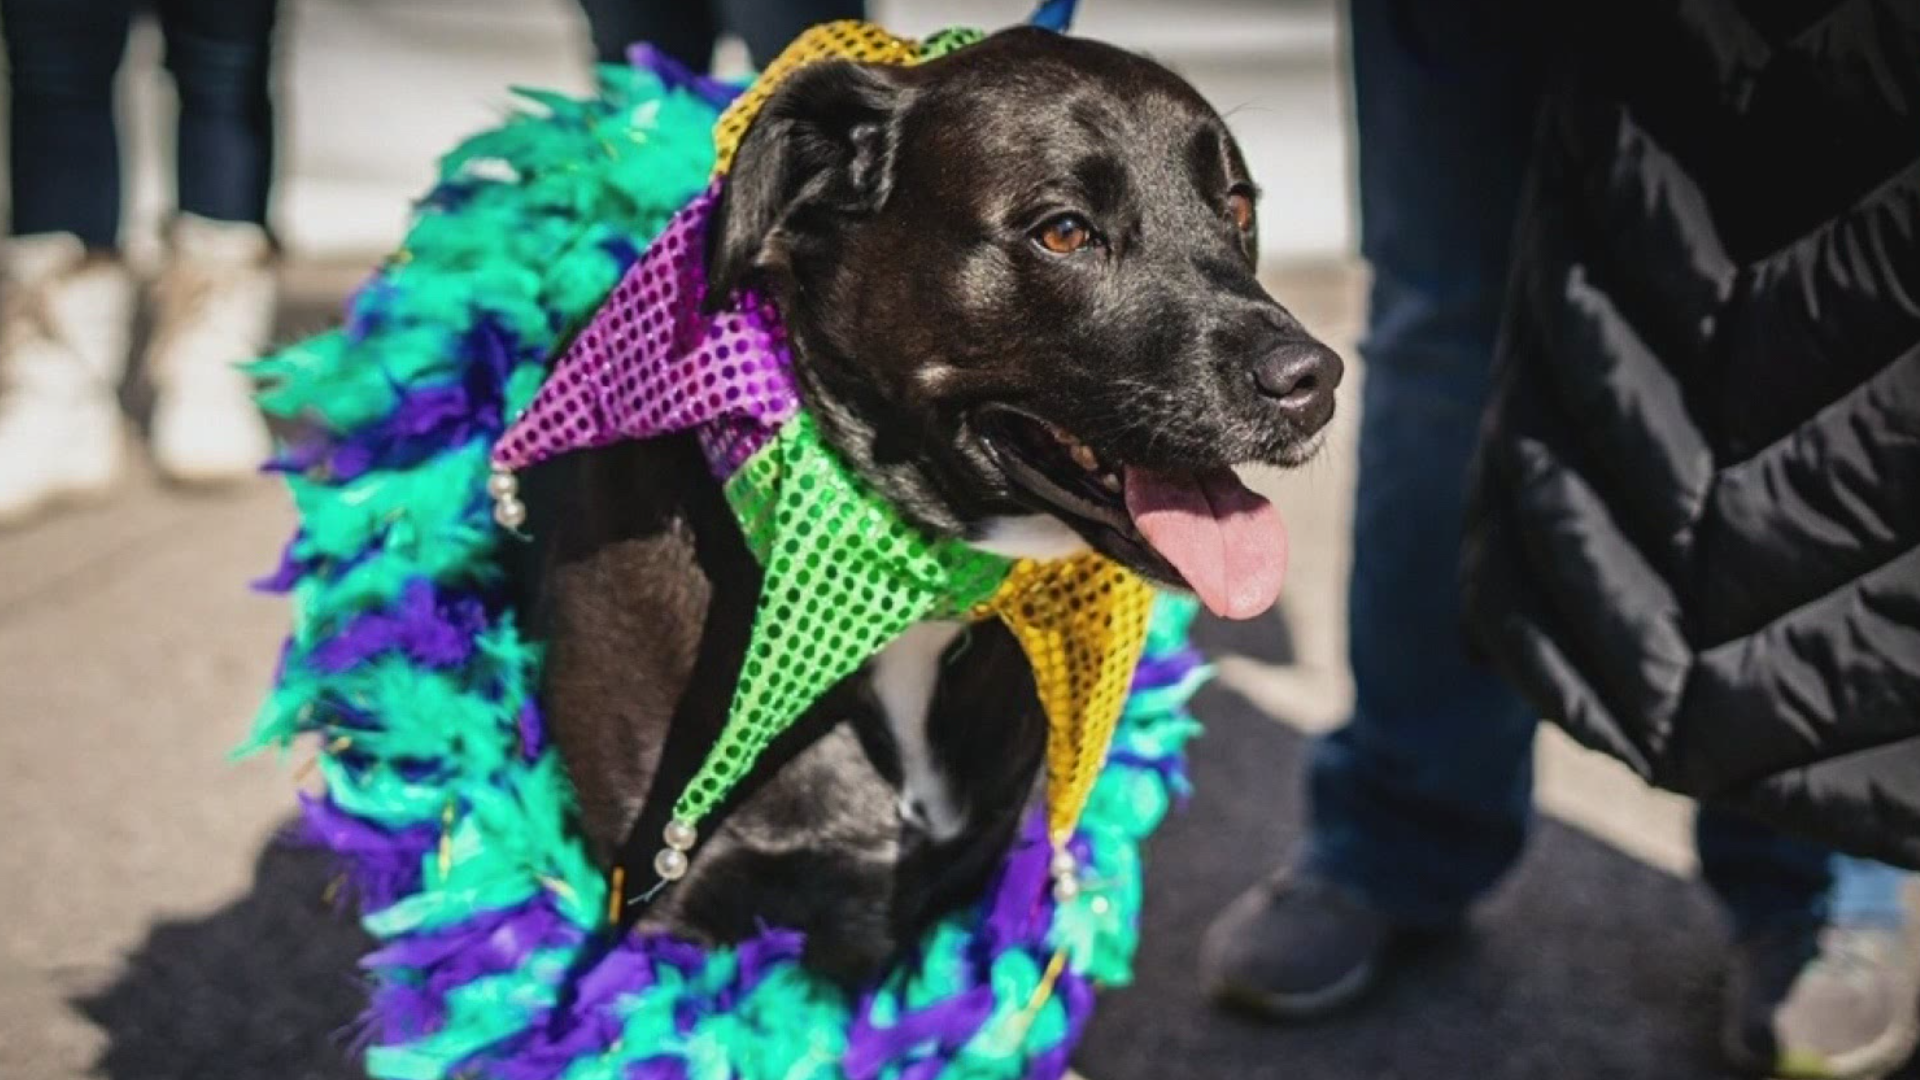 This year, Purina will be hosting a virtual costume contest.